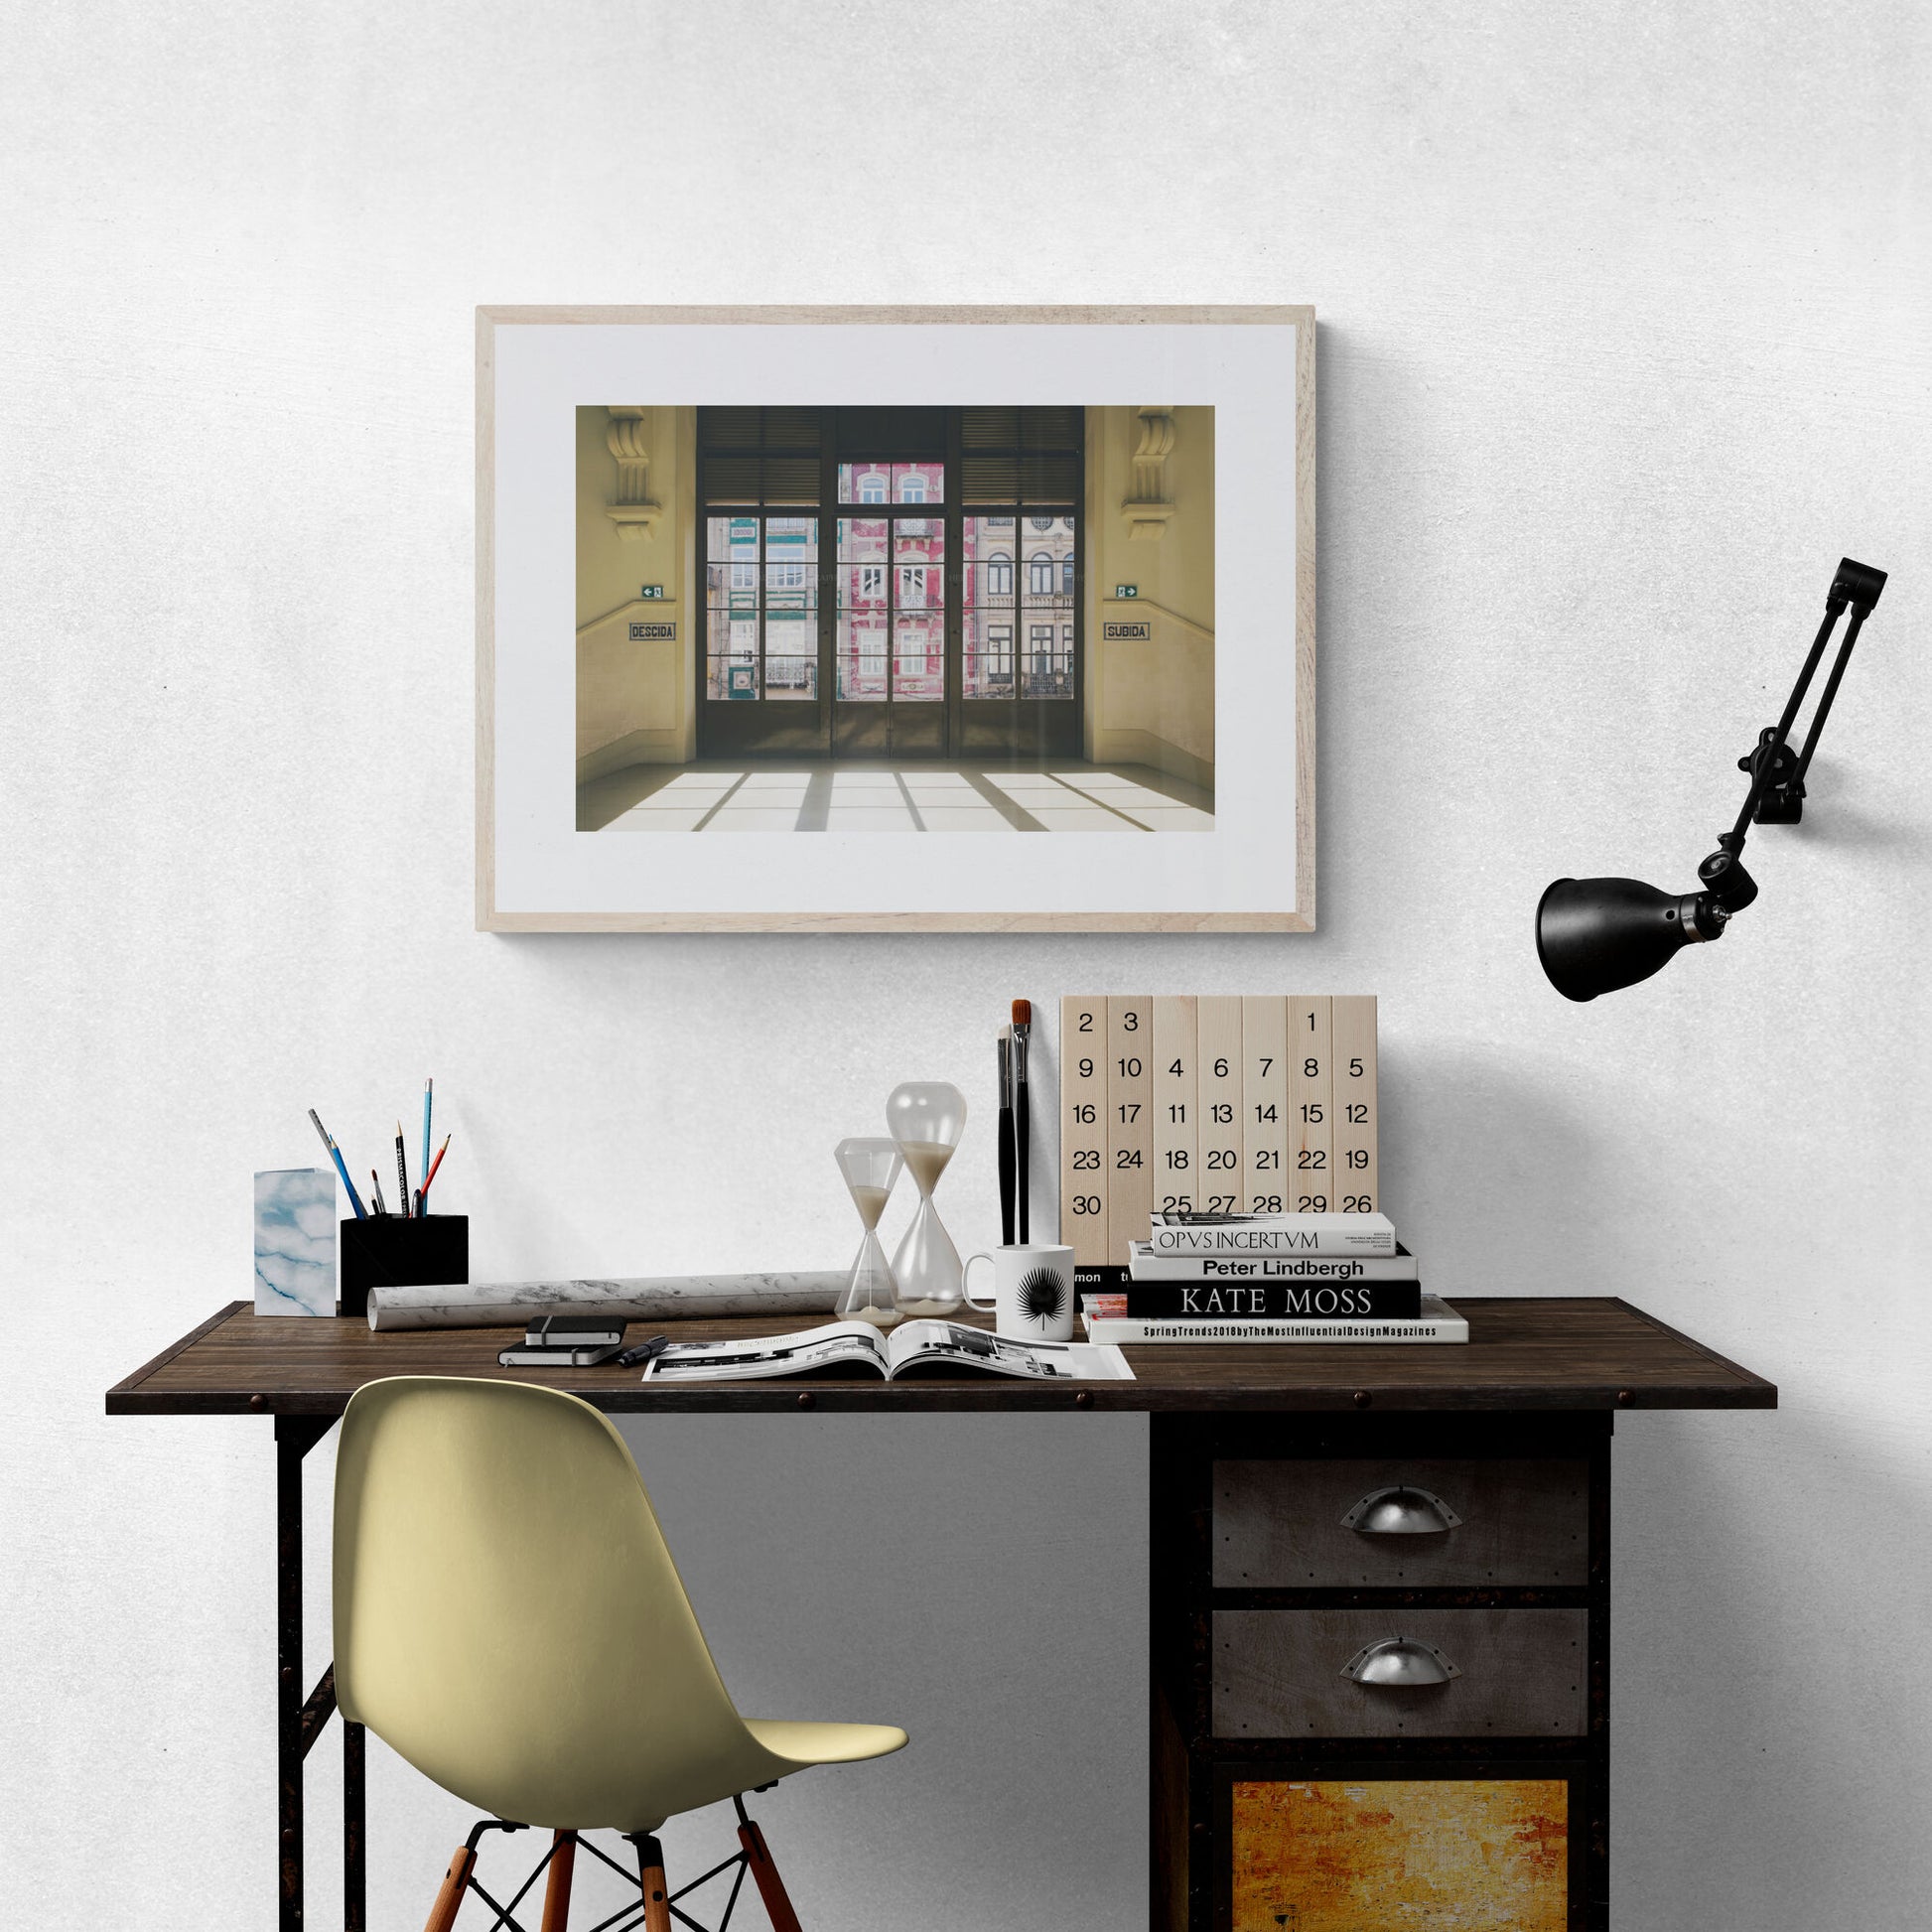 portugal photography architectural signs as wall art in a home office